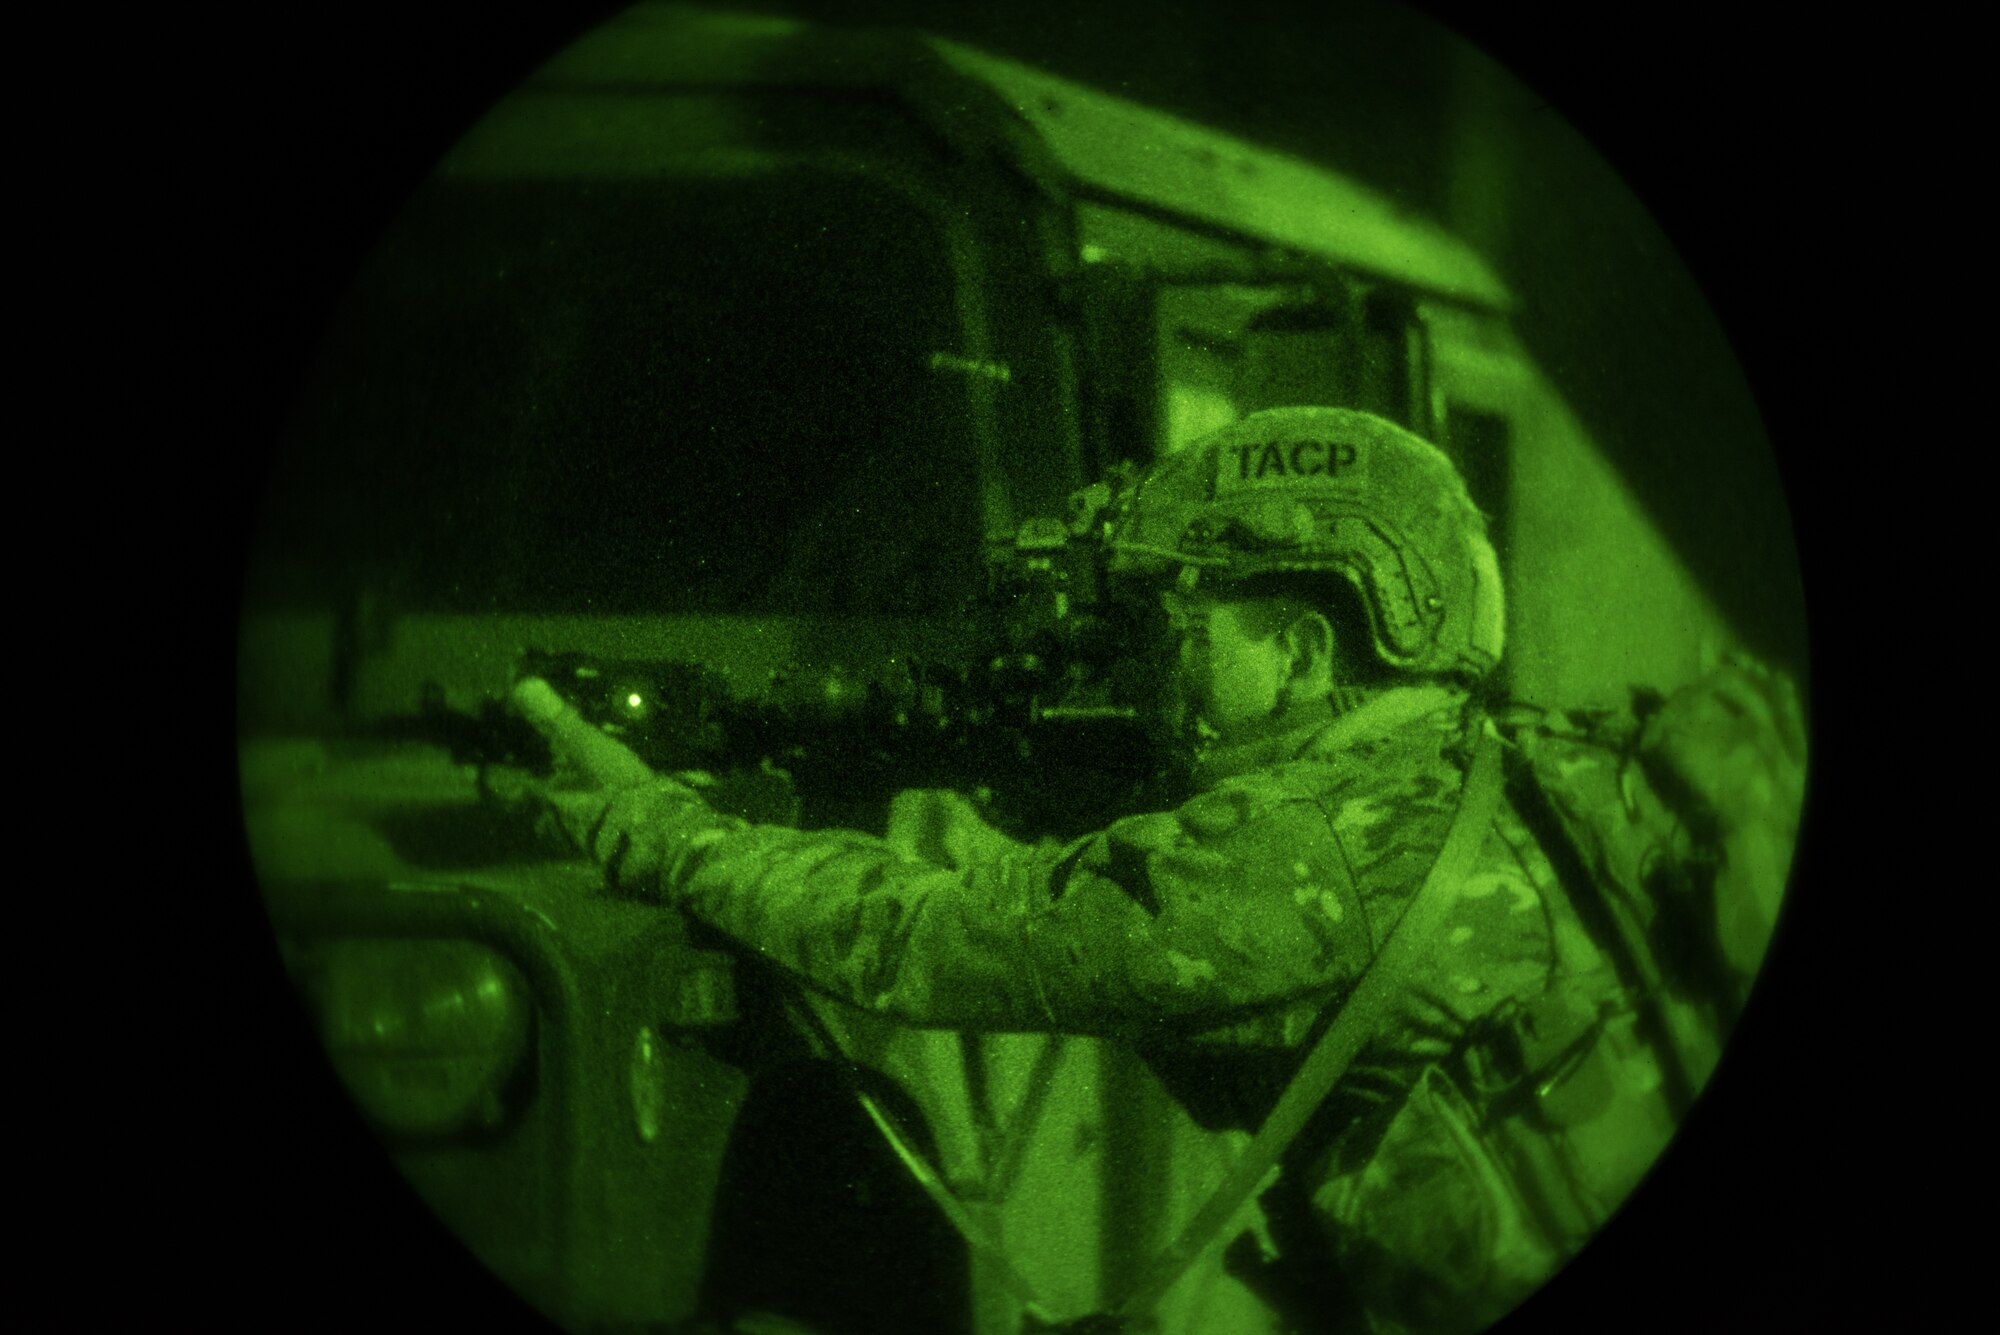 A Tactical Air Control Party specialist from the 148th Air Operations Squadron fires his weapon during night-time training.